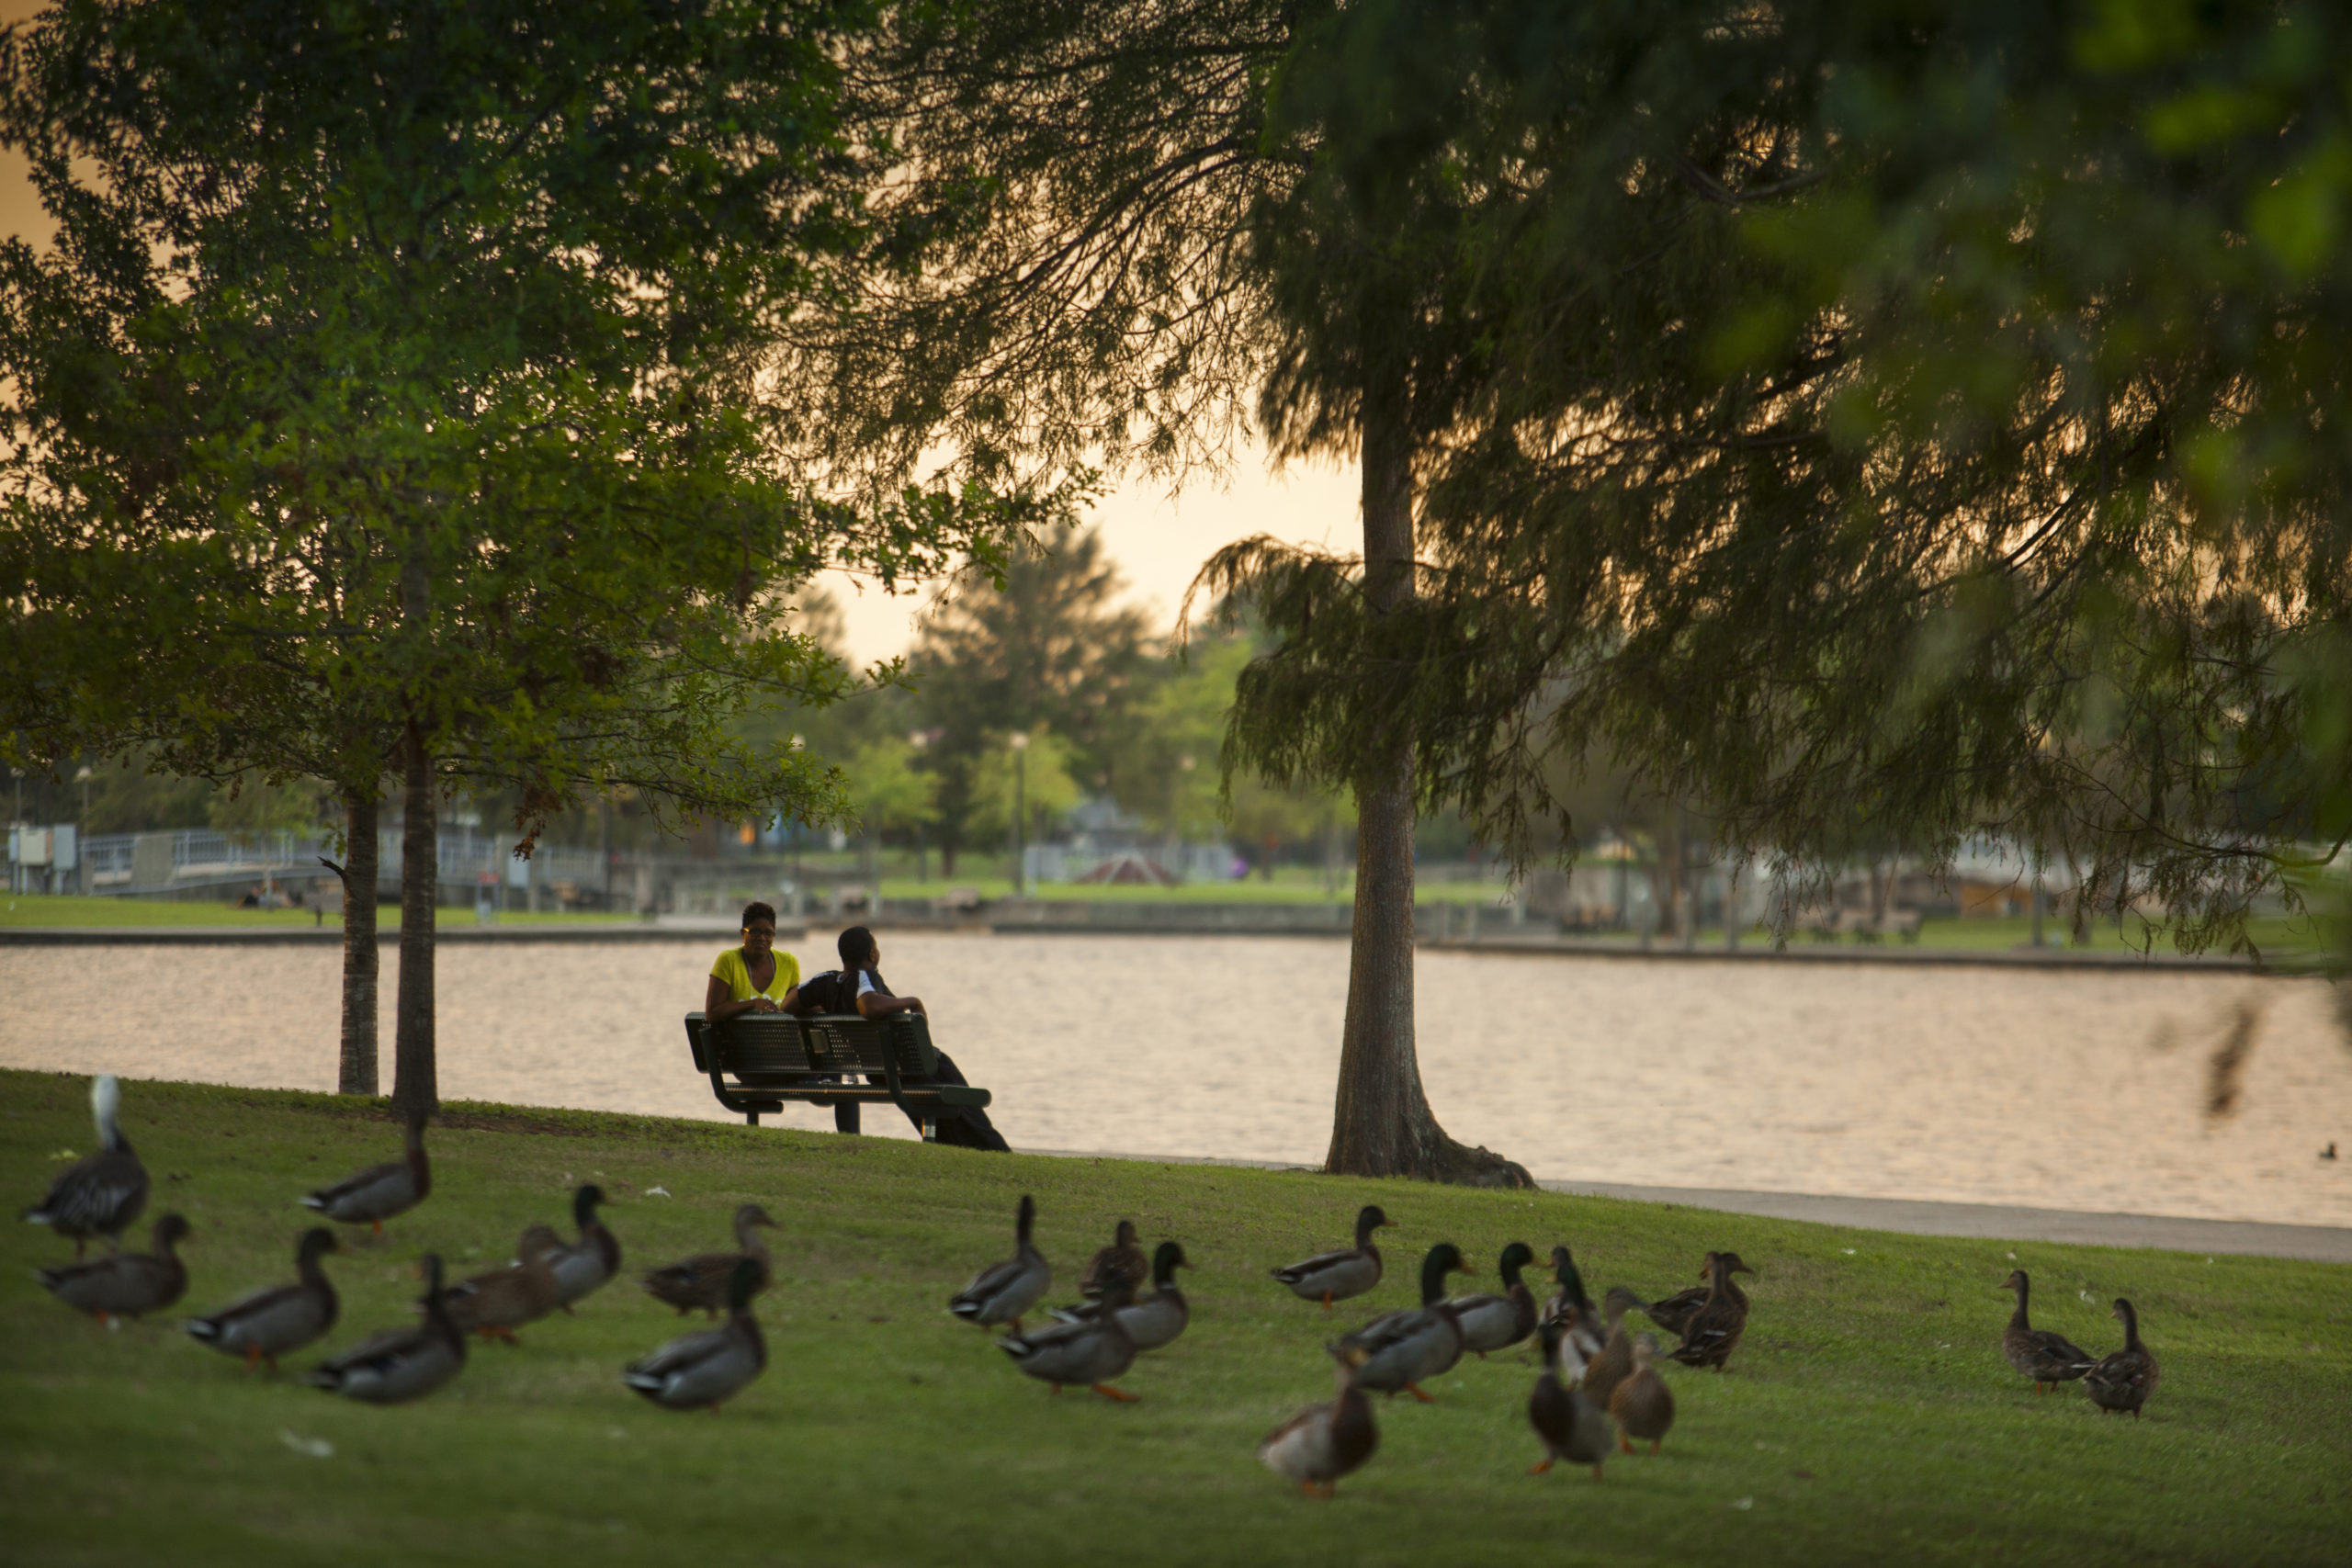 People sit on a bench in a park while ducks run across the grass in New Orleans, LA